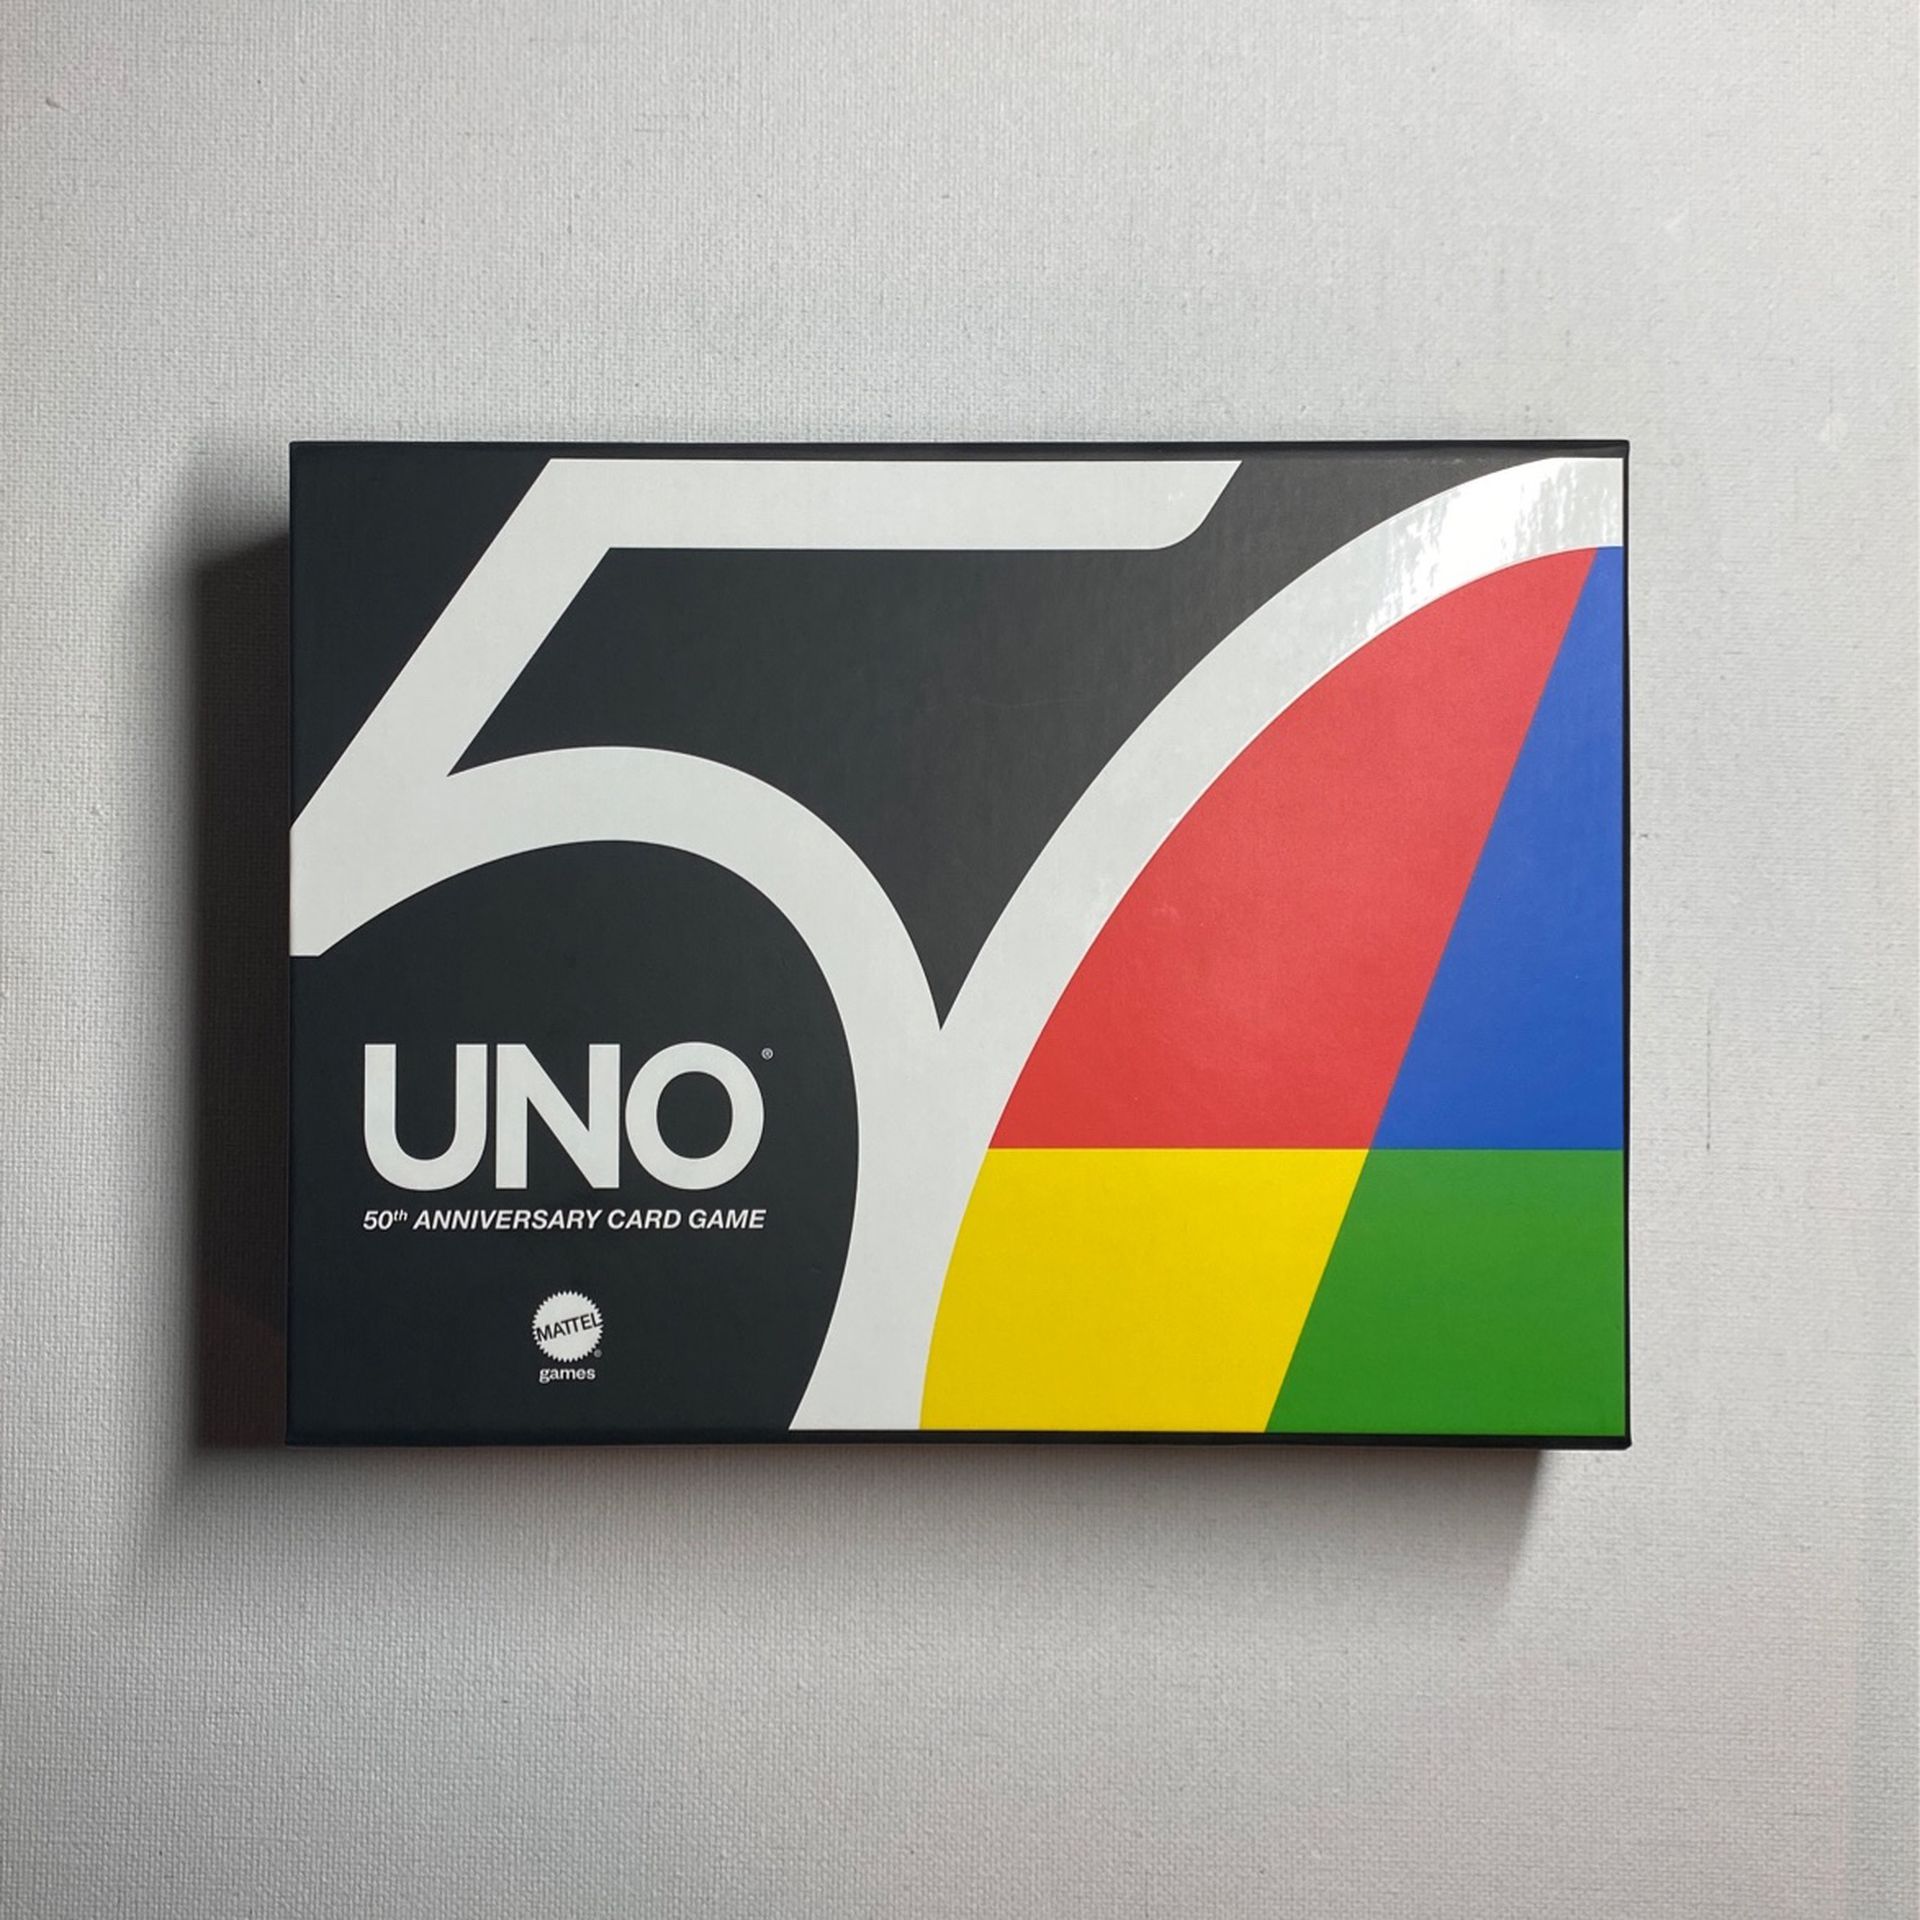 Uno 50th Anniversary Card Game (3 Sealed Units)